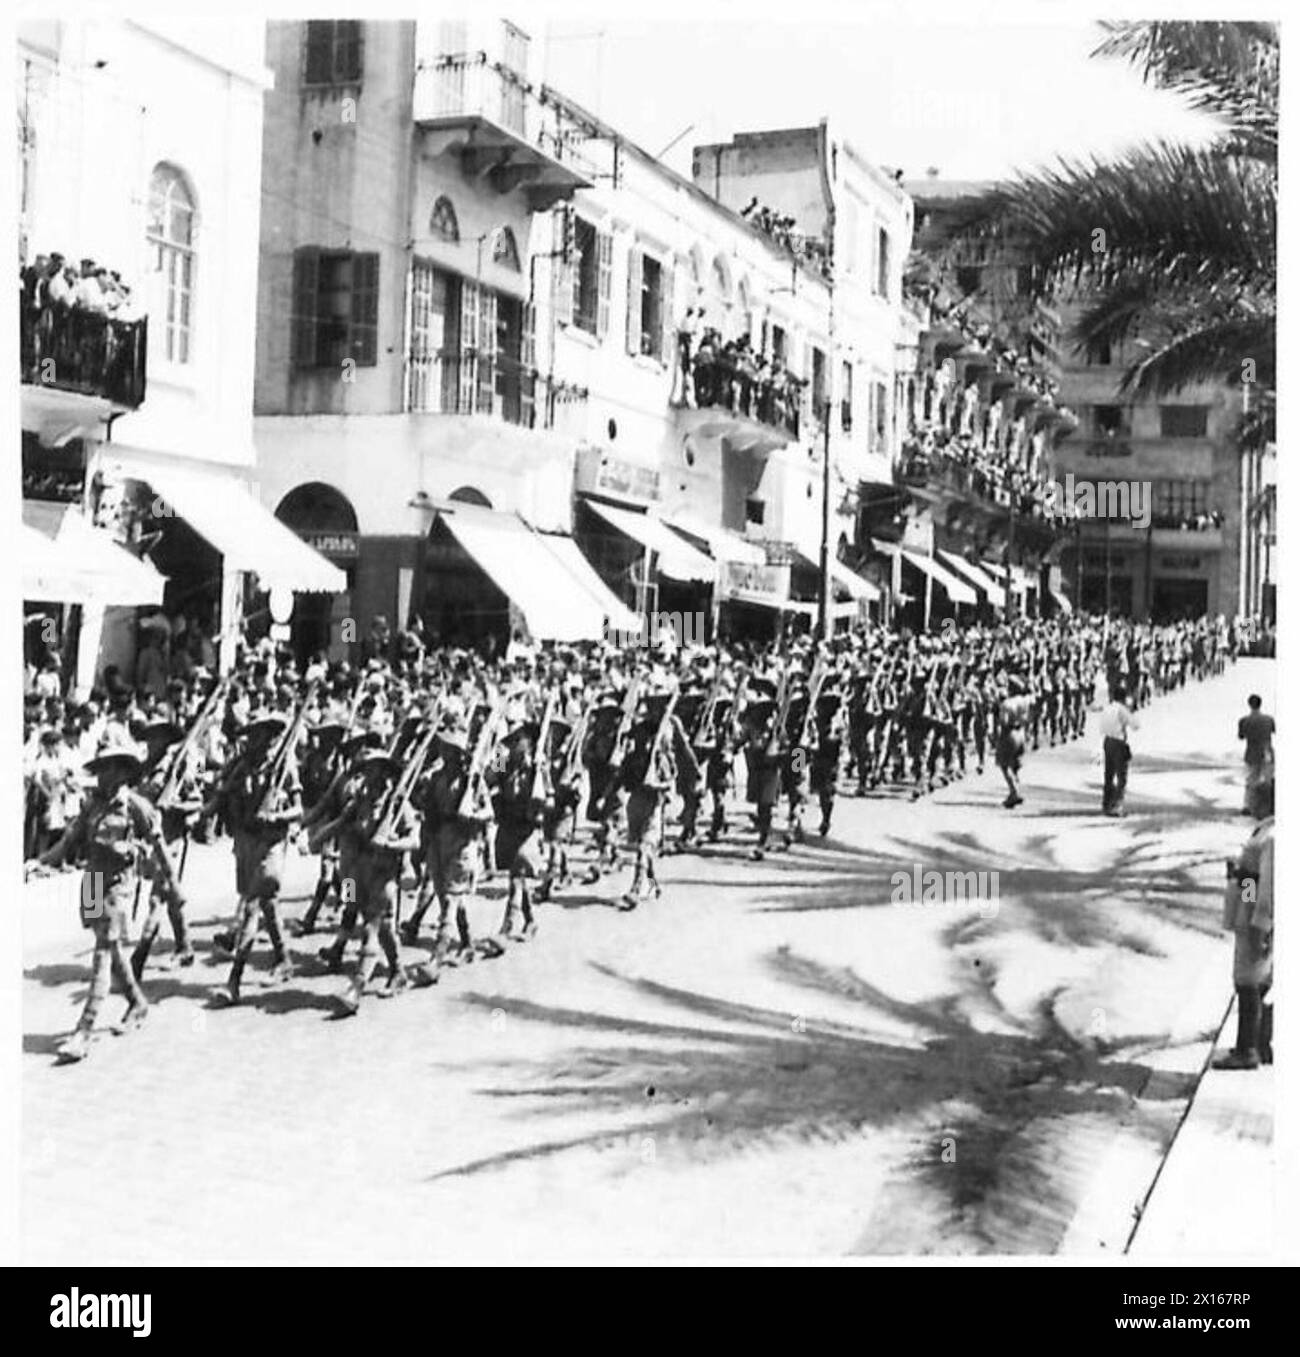 ENTRY OF THE BRITISH GENERAL AND TROOPS INTO BEIRUT - Australian troops marching to the martial strains of their band through the city British Army Stock Photo